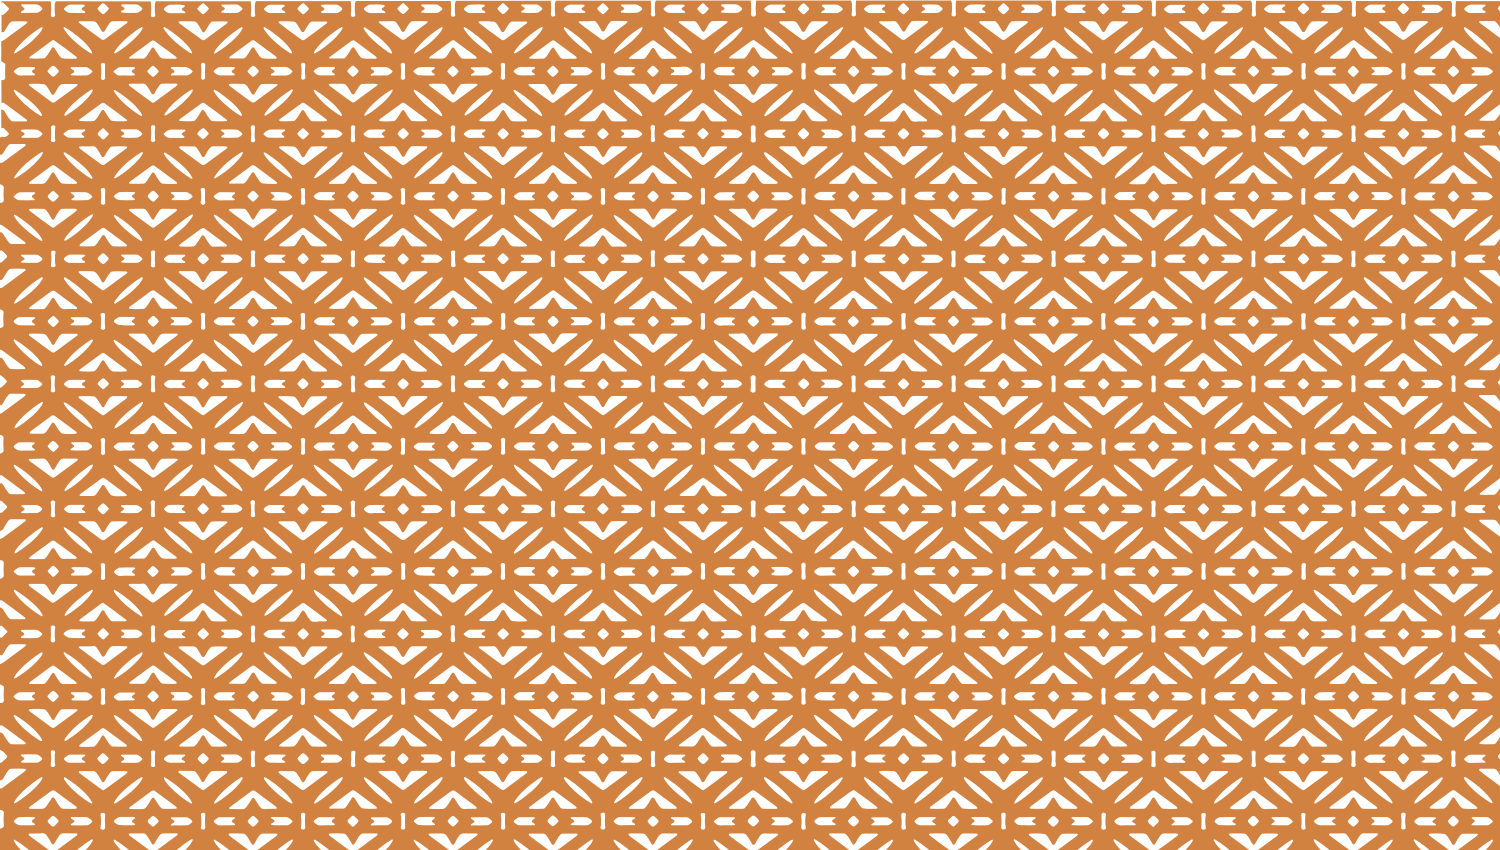 Parasoleil™ Canyon Road© pattern displayed with a ochre color overlay